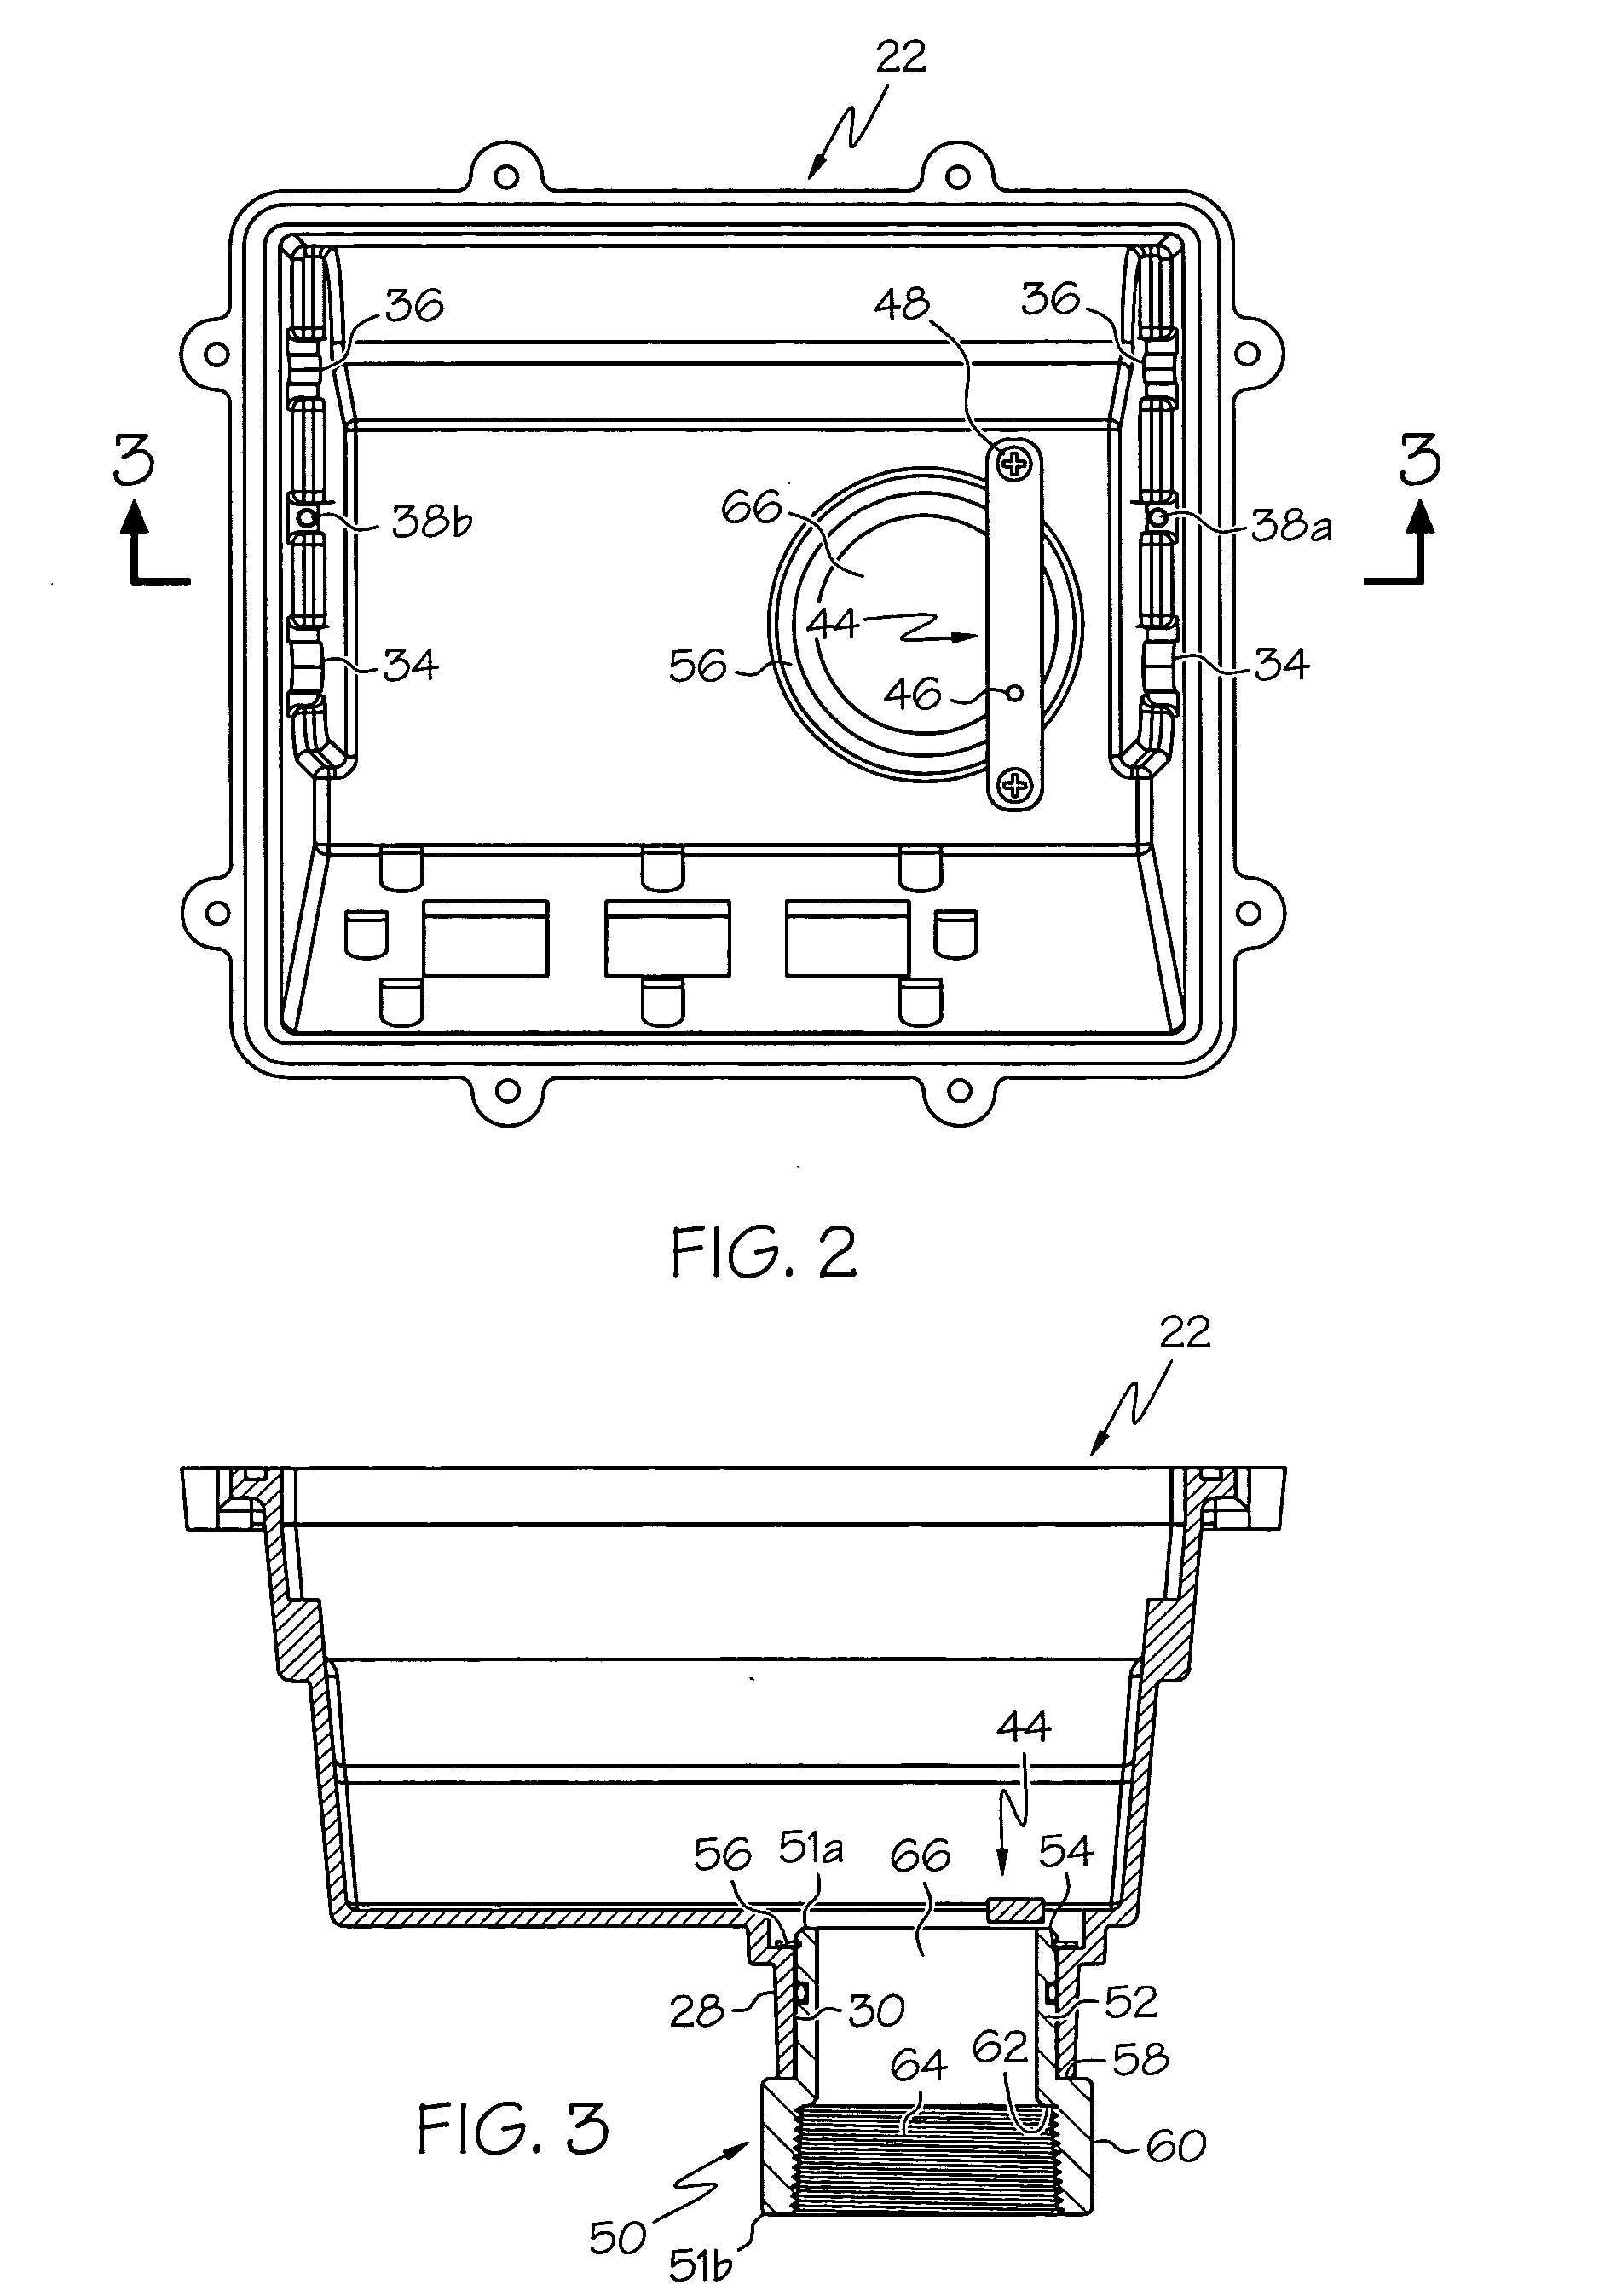 Apparatus for measuring a fluid level and methods